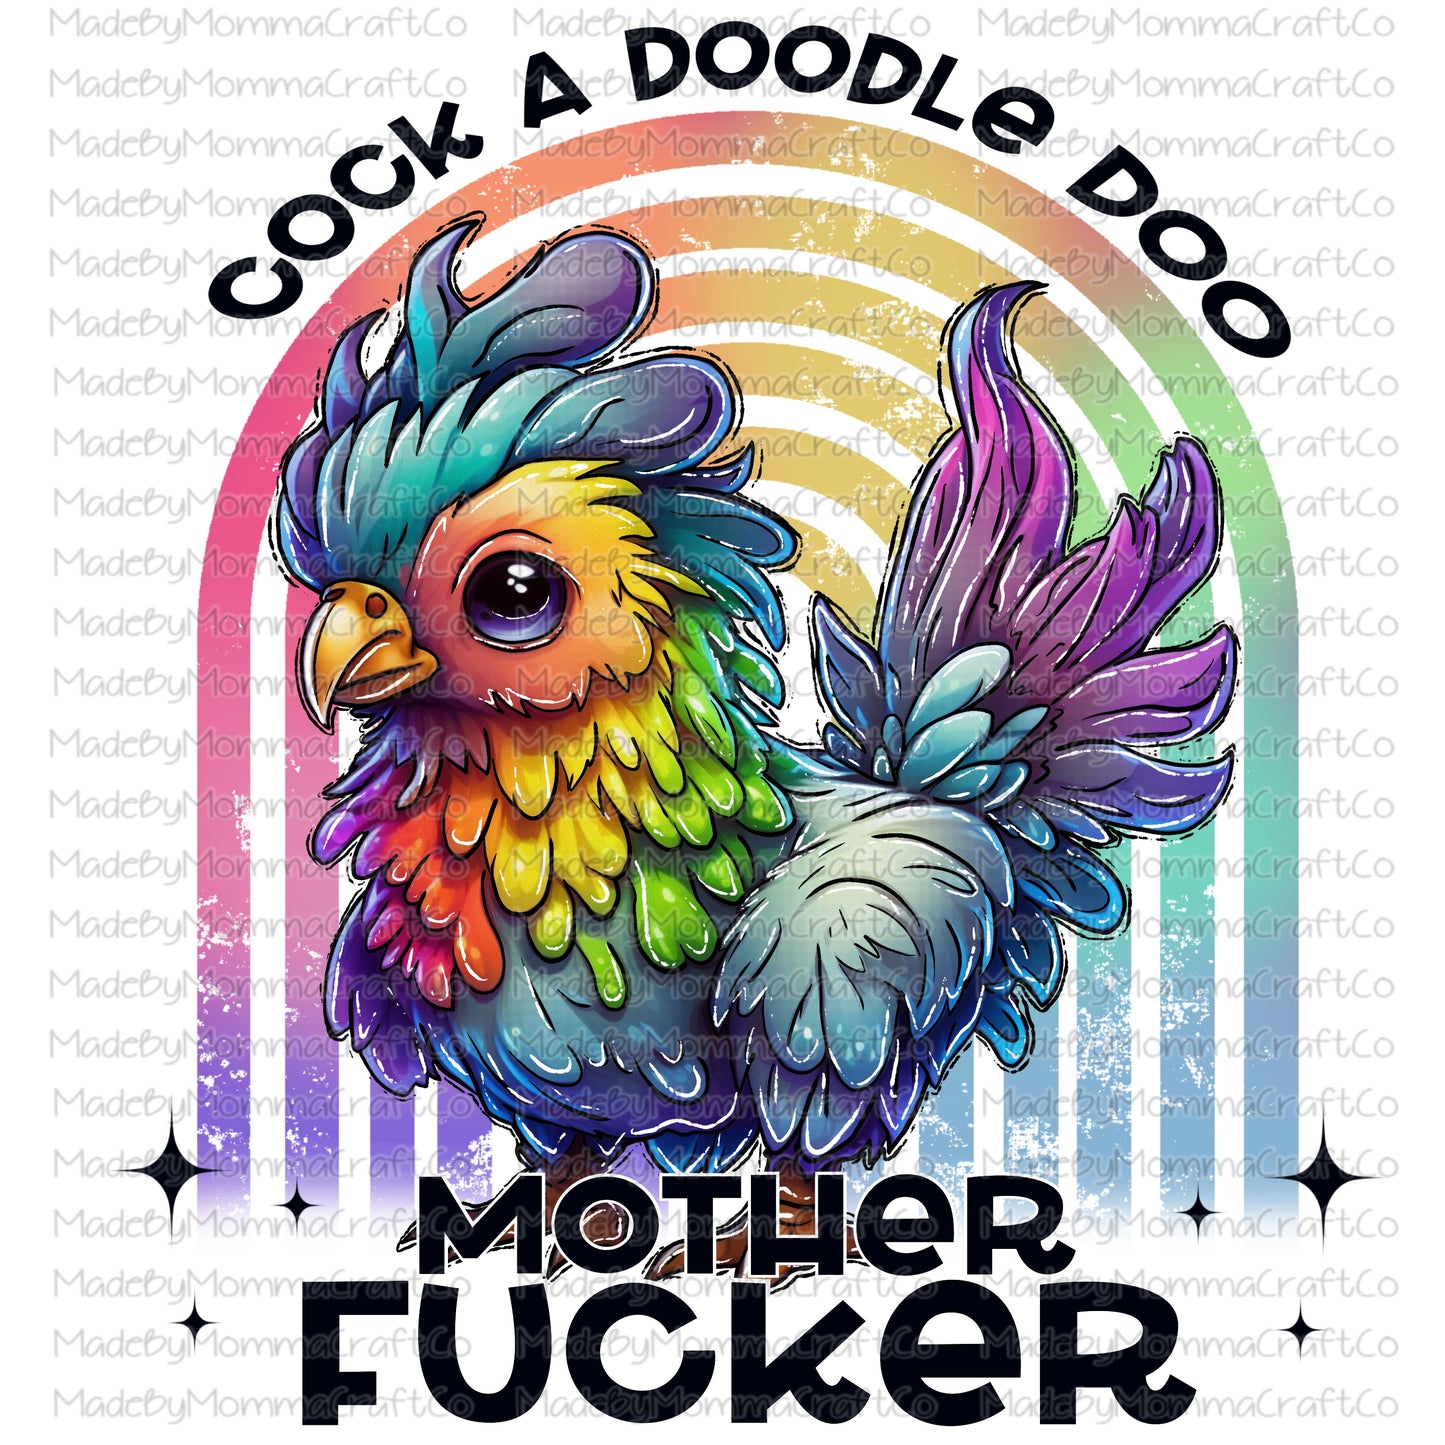 Cock a doodle doo mother fucker adult humor - Cheat Clear Waterslide Decal or Digital Download